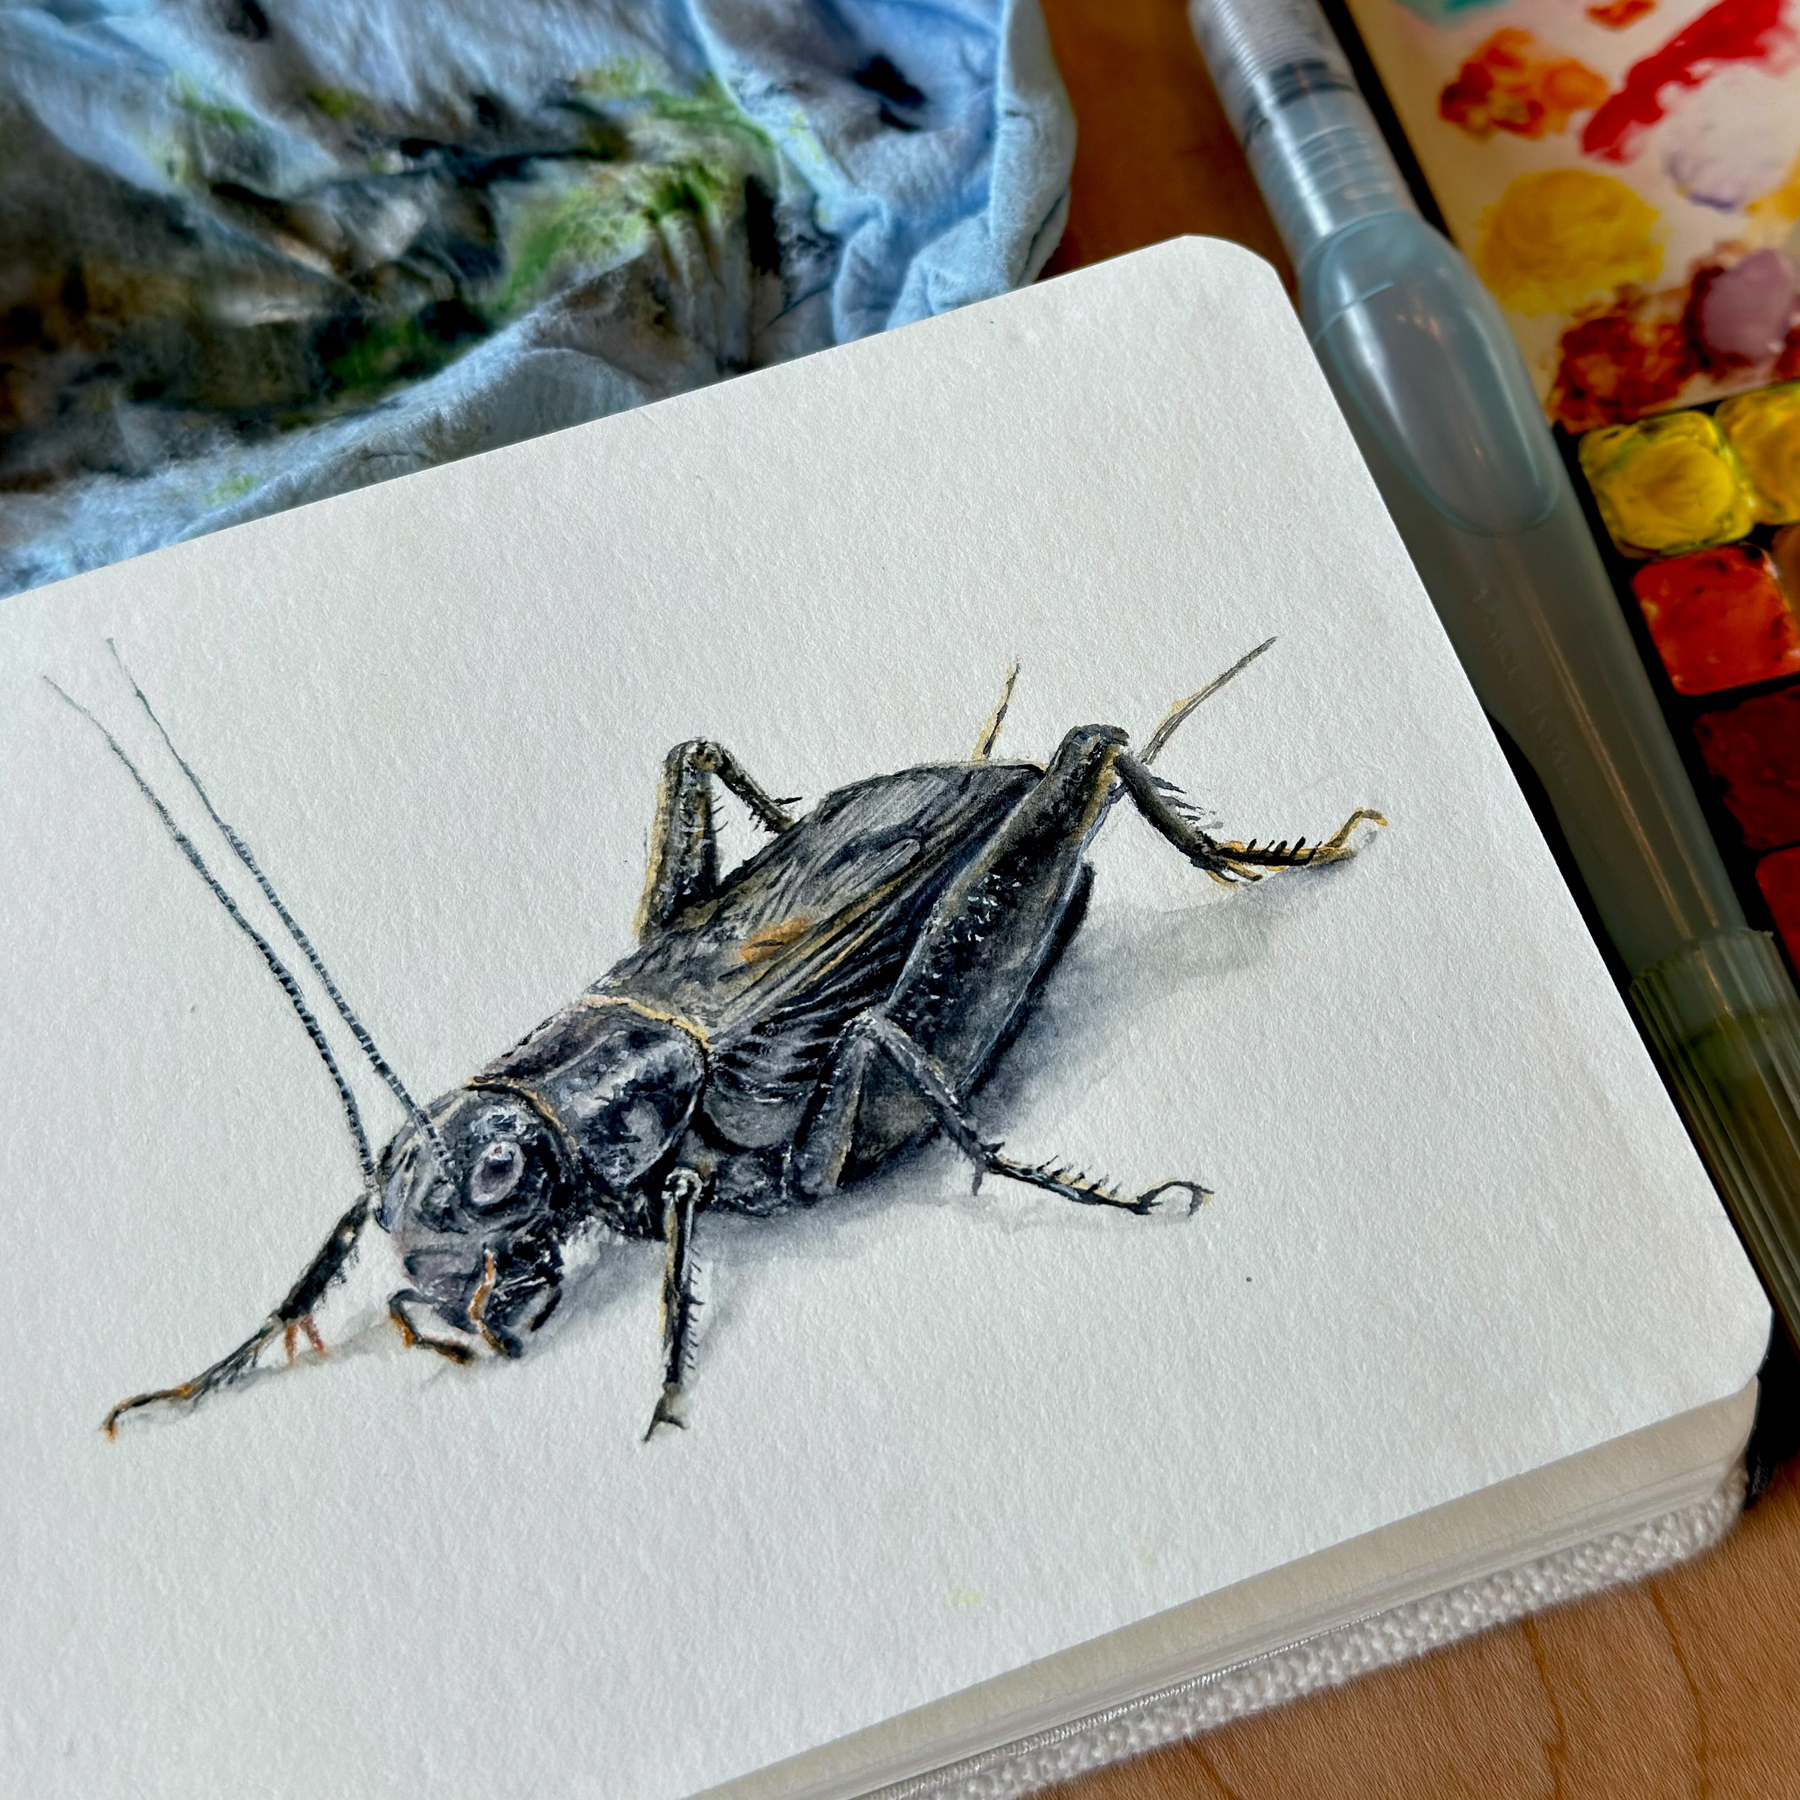 A detailed watercolor sketch of a cricket on white paper, created using an Etchr hot press sketchbook, a Pentel brush pen, and QoR watercolors. The sketch captures the intricate details and textures of the cricket. Art supplies are visible in the background.